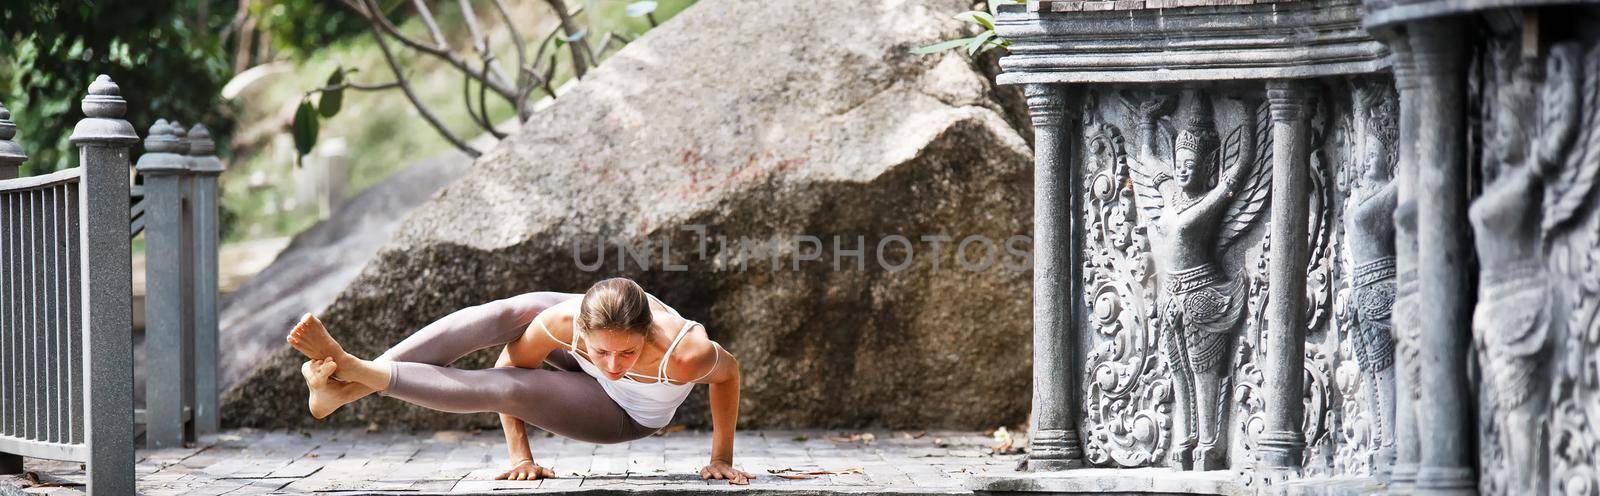 Young woman doing yoga in abandoned temple on wooden platform. Practicing. by Jyliana